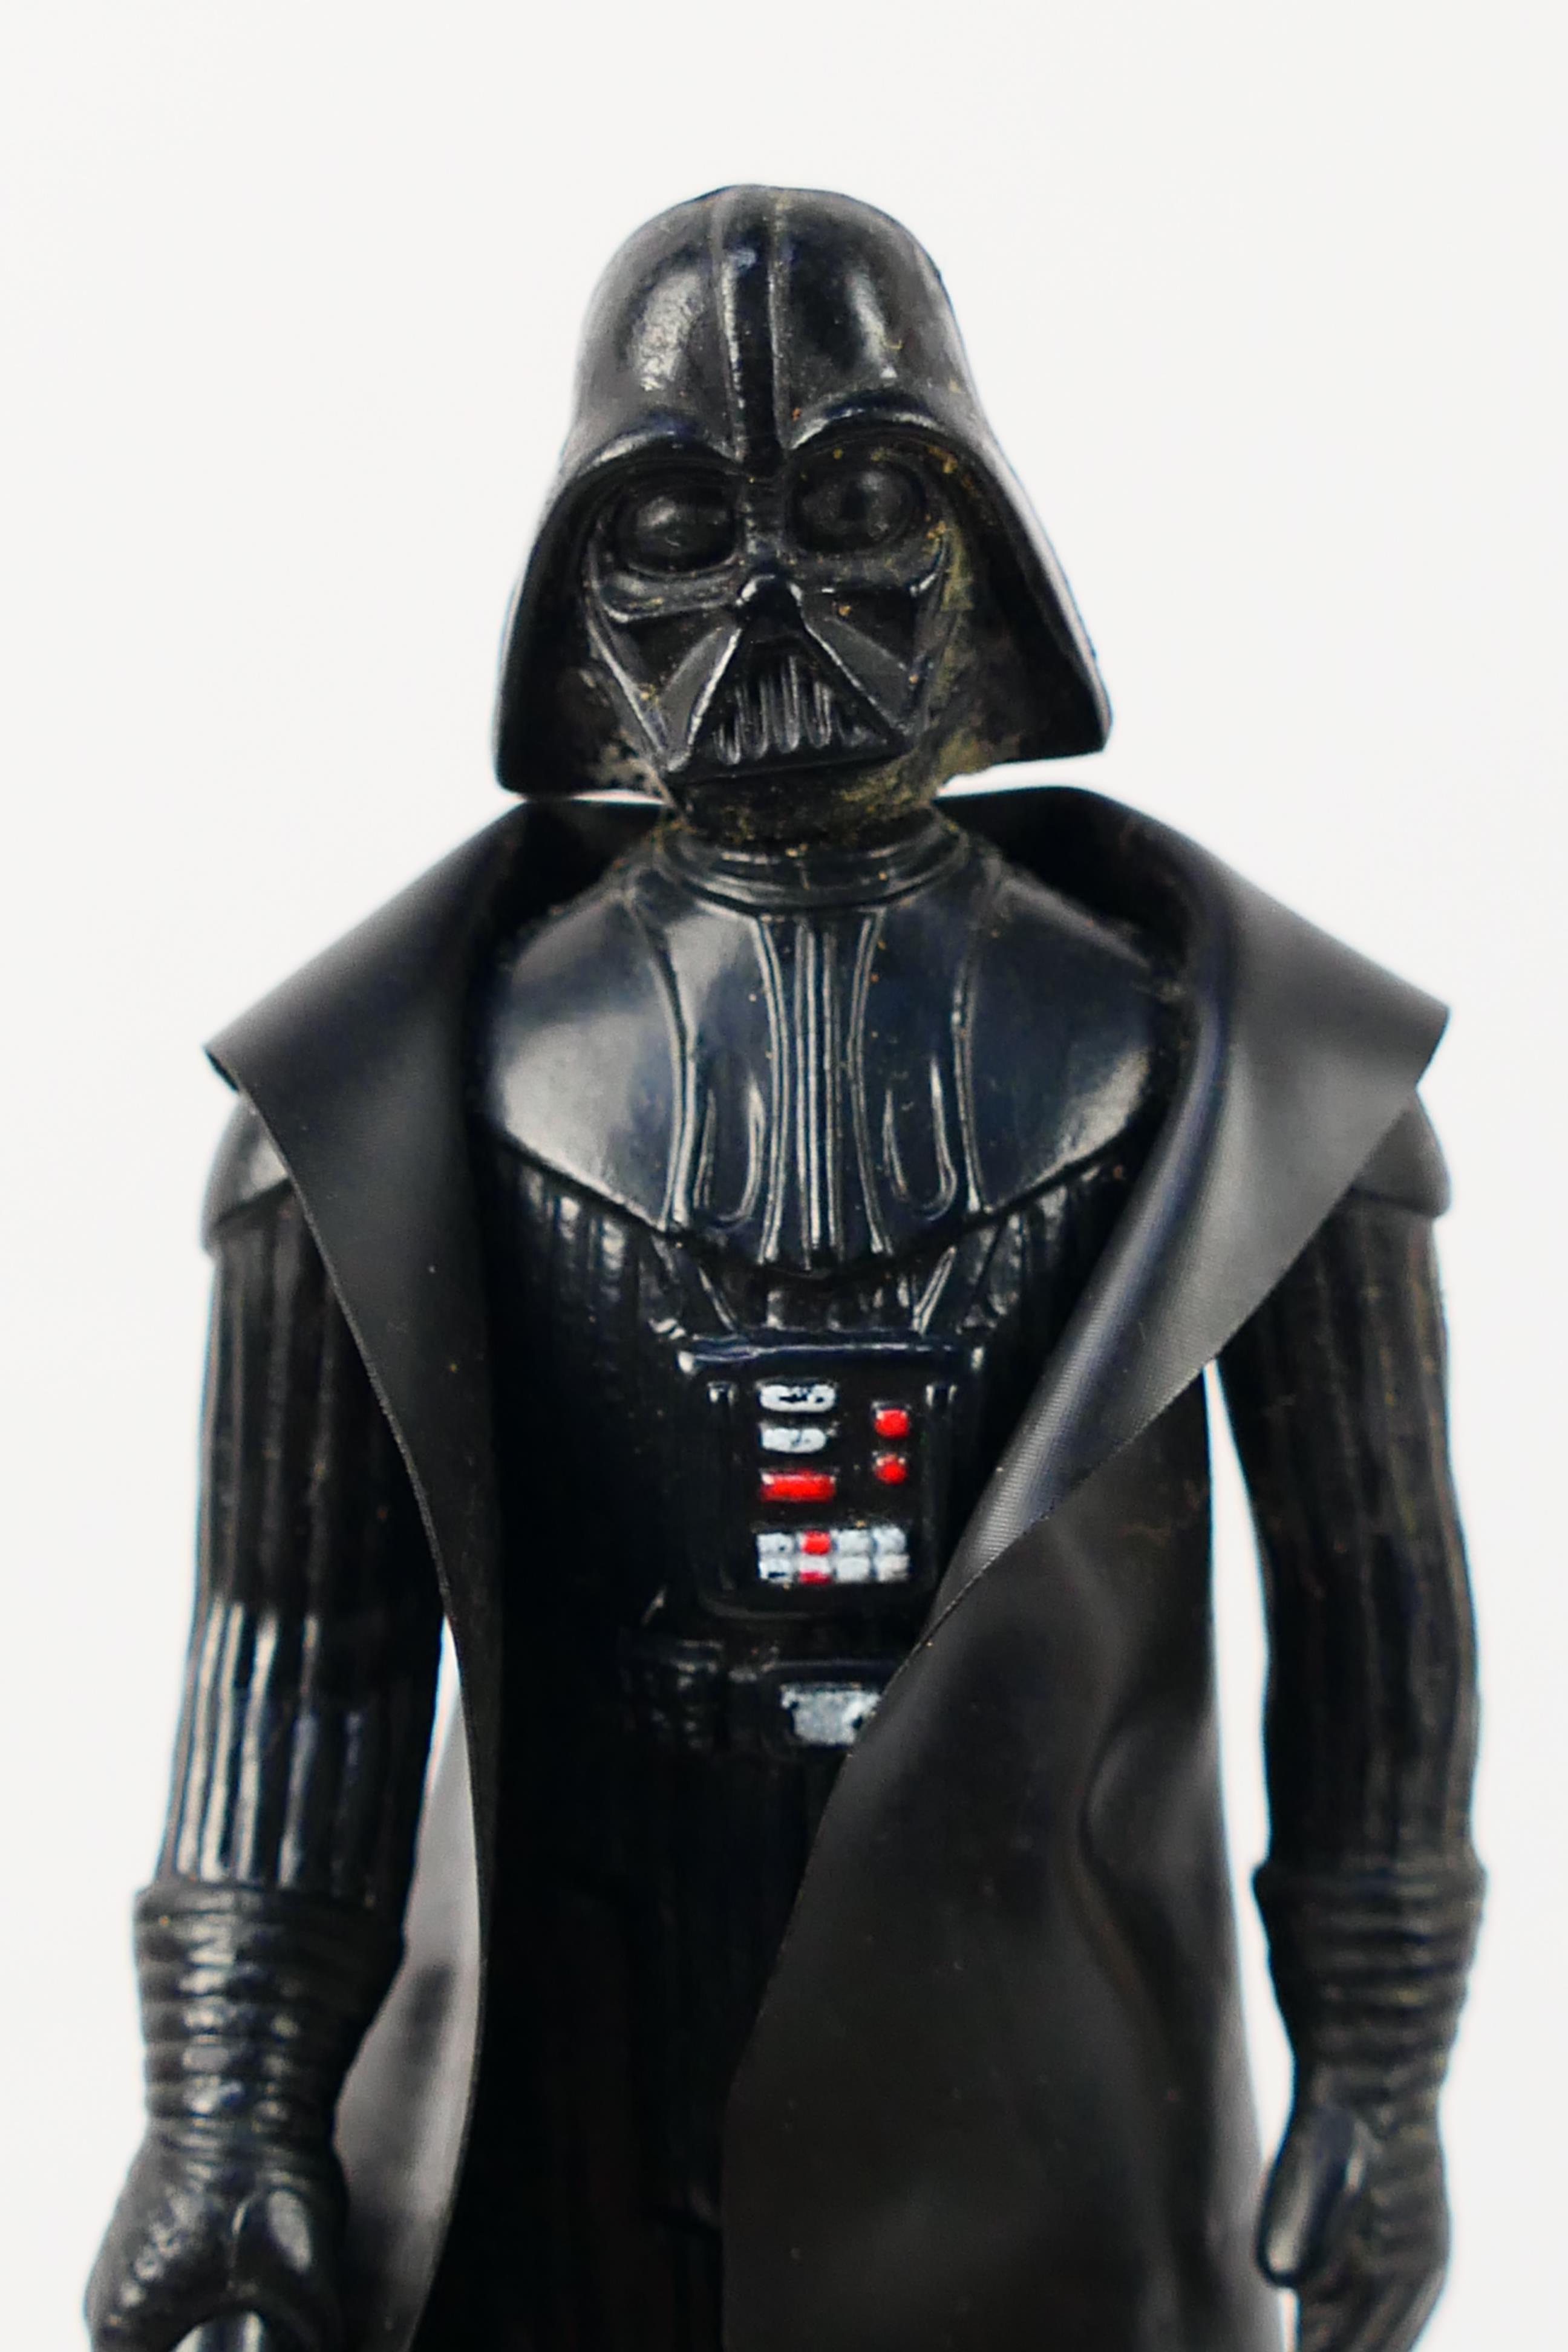 Kenner - Star Wars - A Vintage Star Wars Figure of Darth Vader from 1977 including his working and - Image 2 of 4